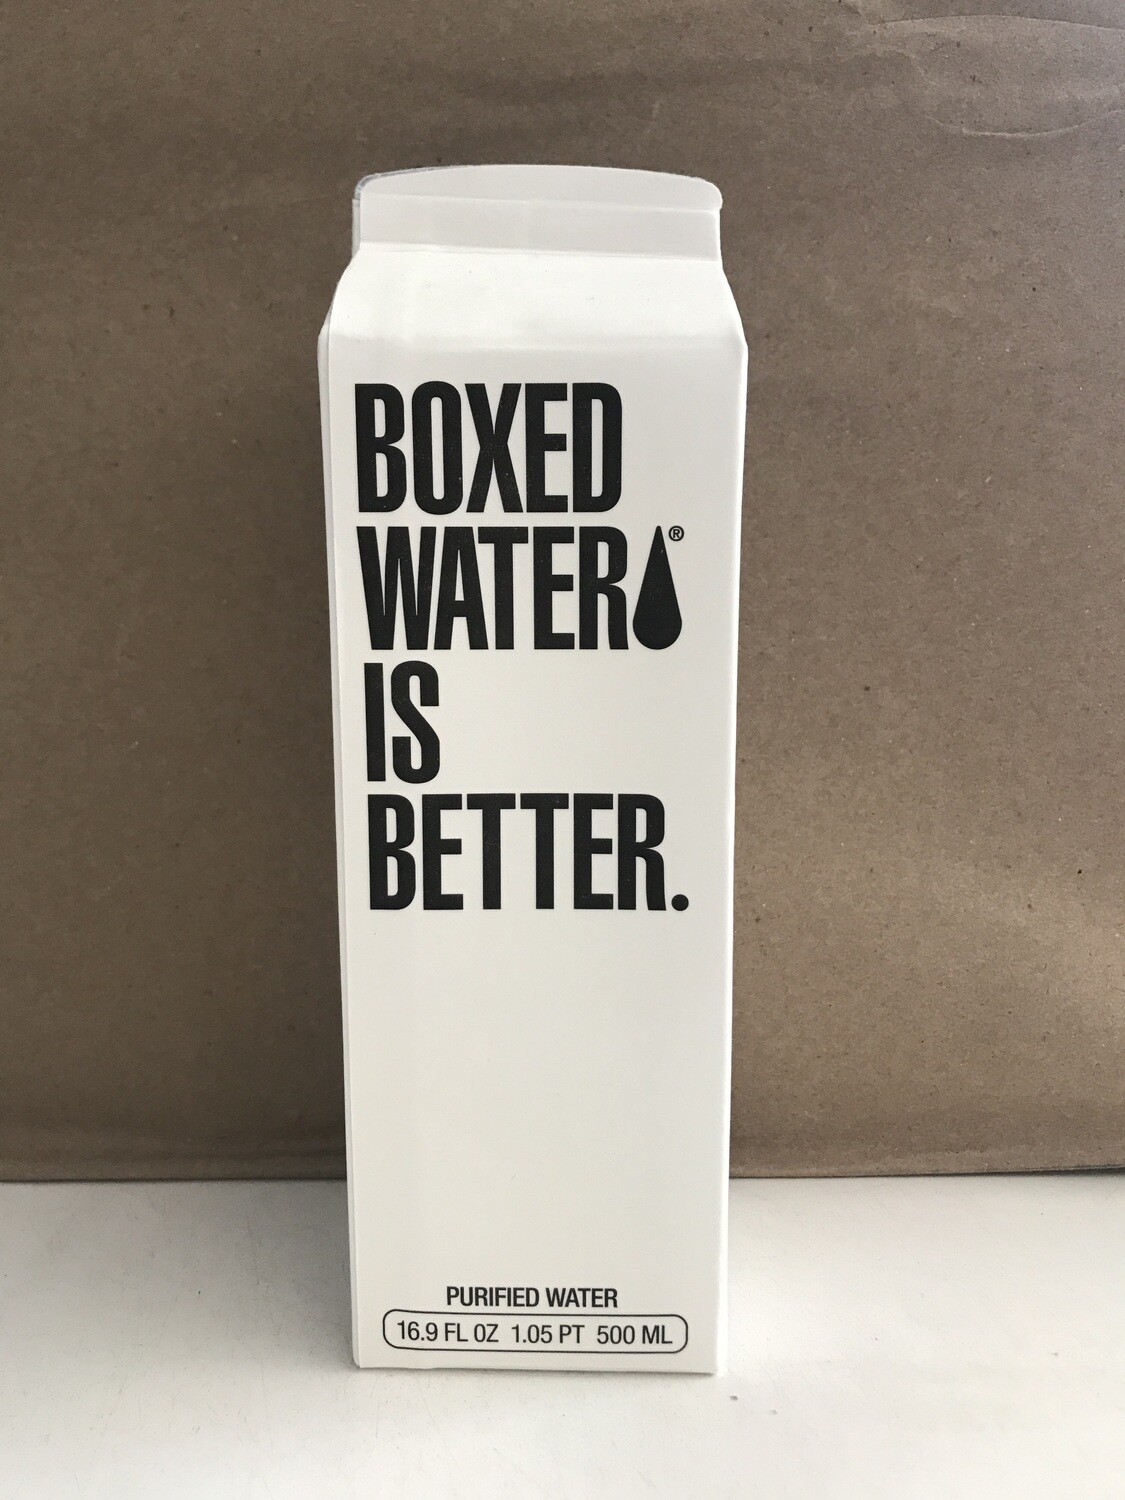 Beverage / Water / Boxed Water is Better, 500 ml